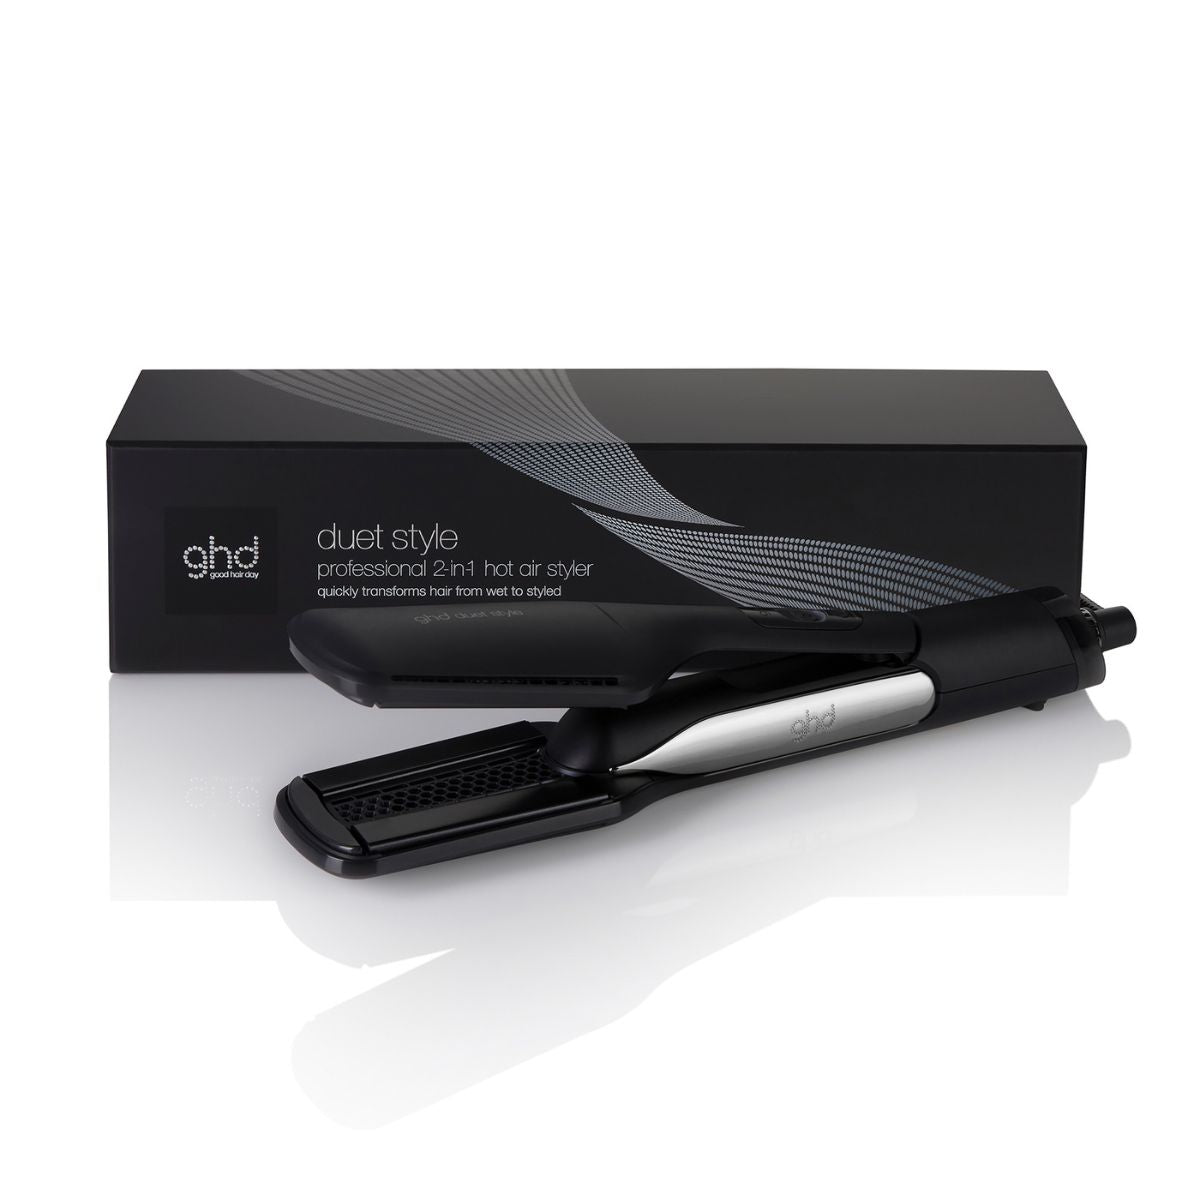 Ghd Duet Style 2-in-1 Hot Air Styler in Black